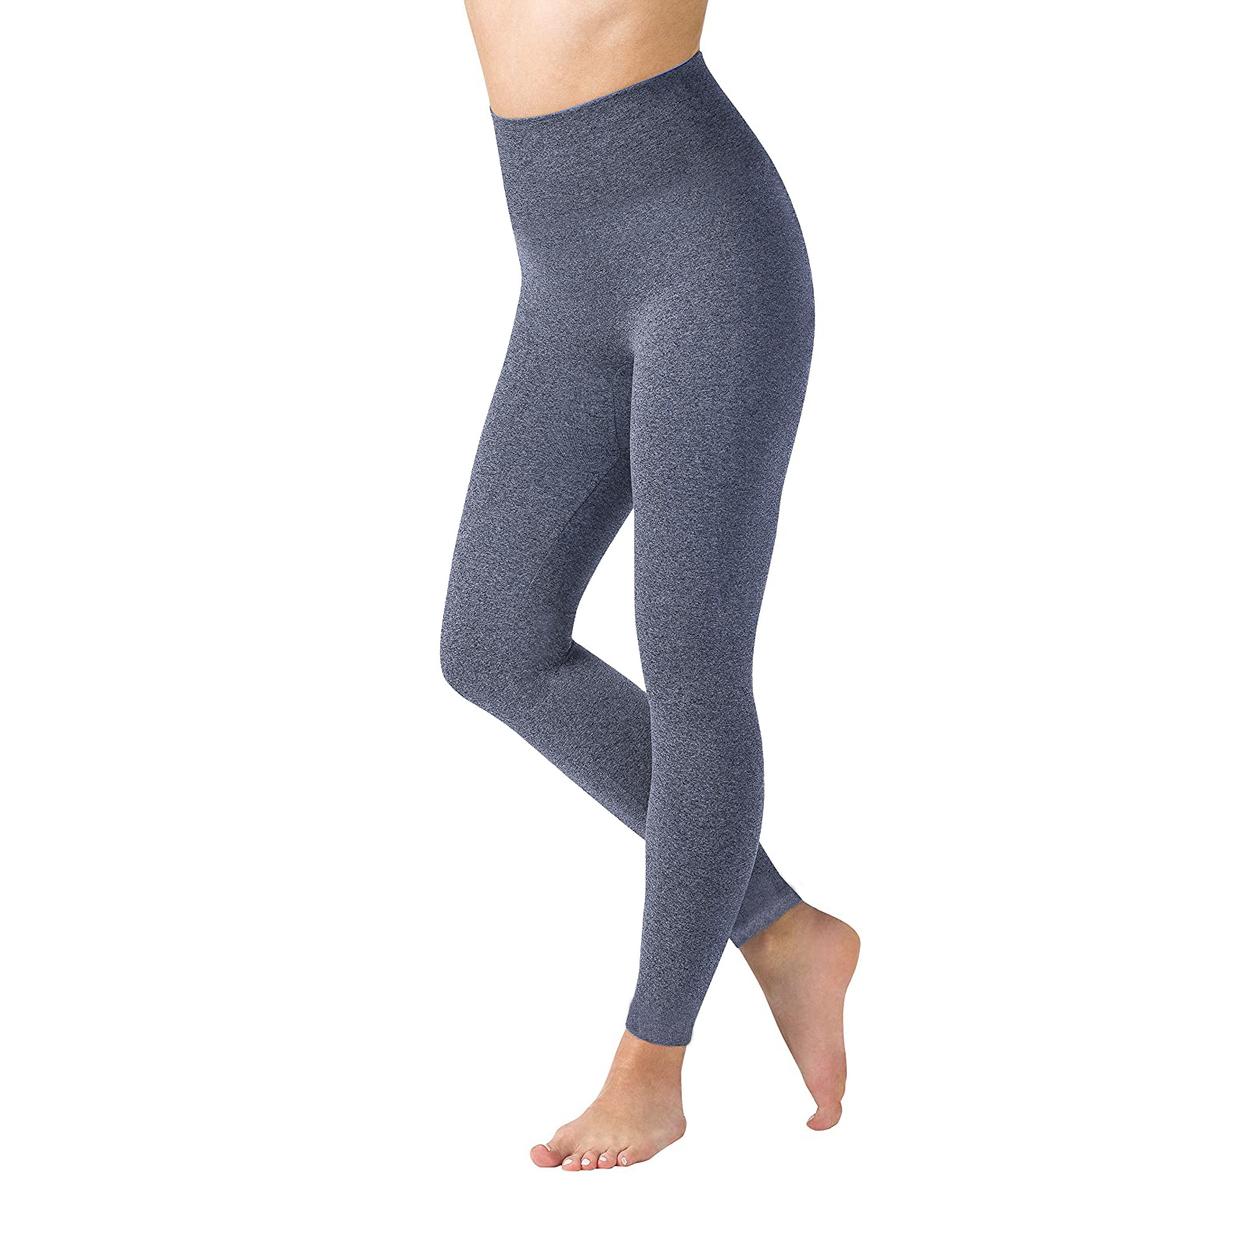 Multi-Pack: Women's High Waisted Ultra-Soft Fleece Lined Warm Marled Leggings(Available In Plus Sizes) - 2-pack, Charcoal & Charcoal, 2x